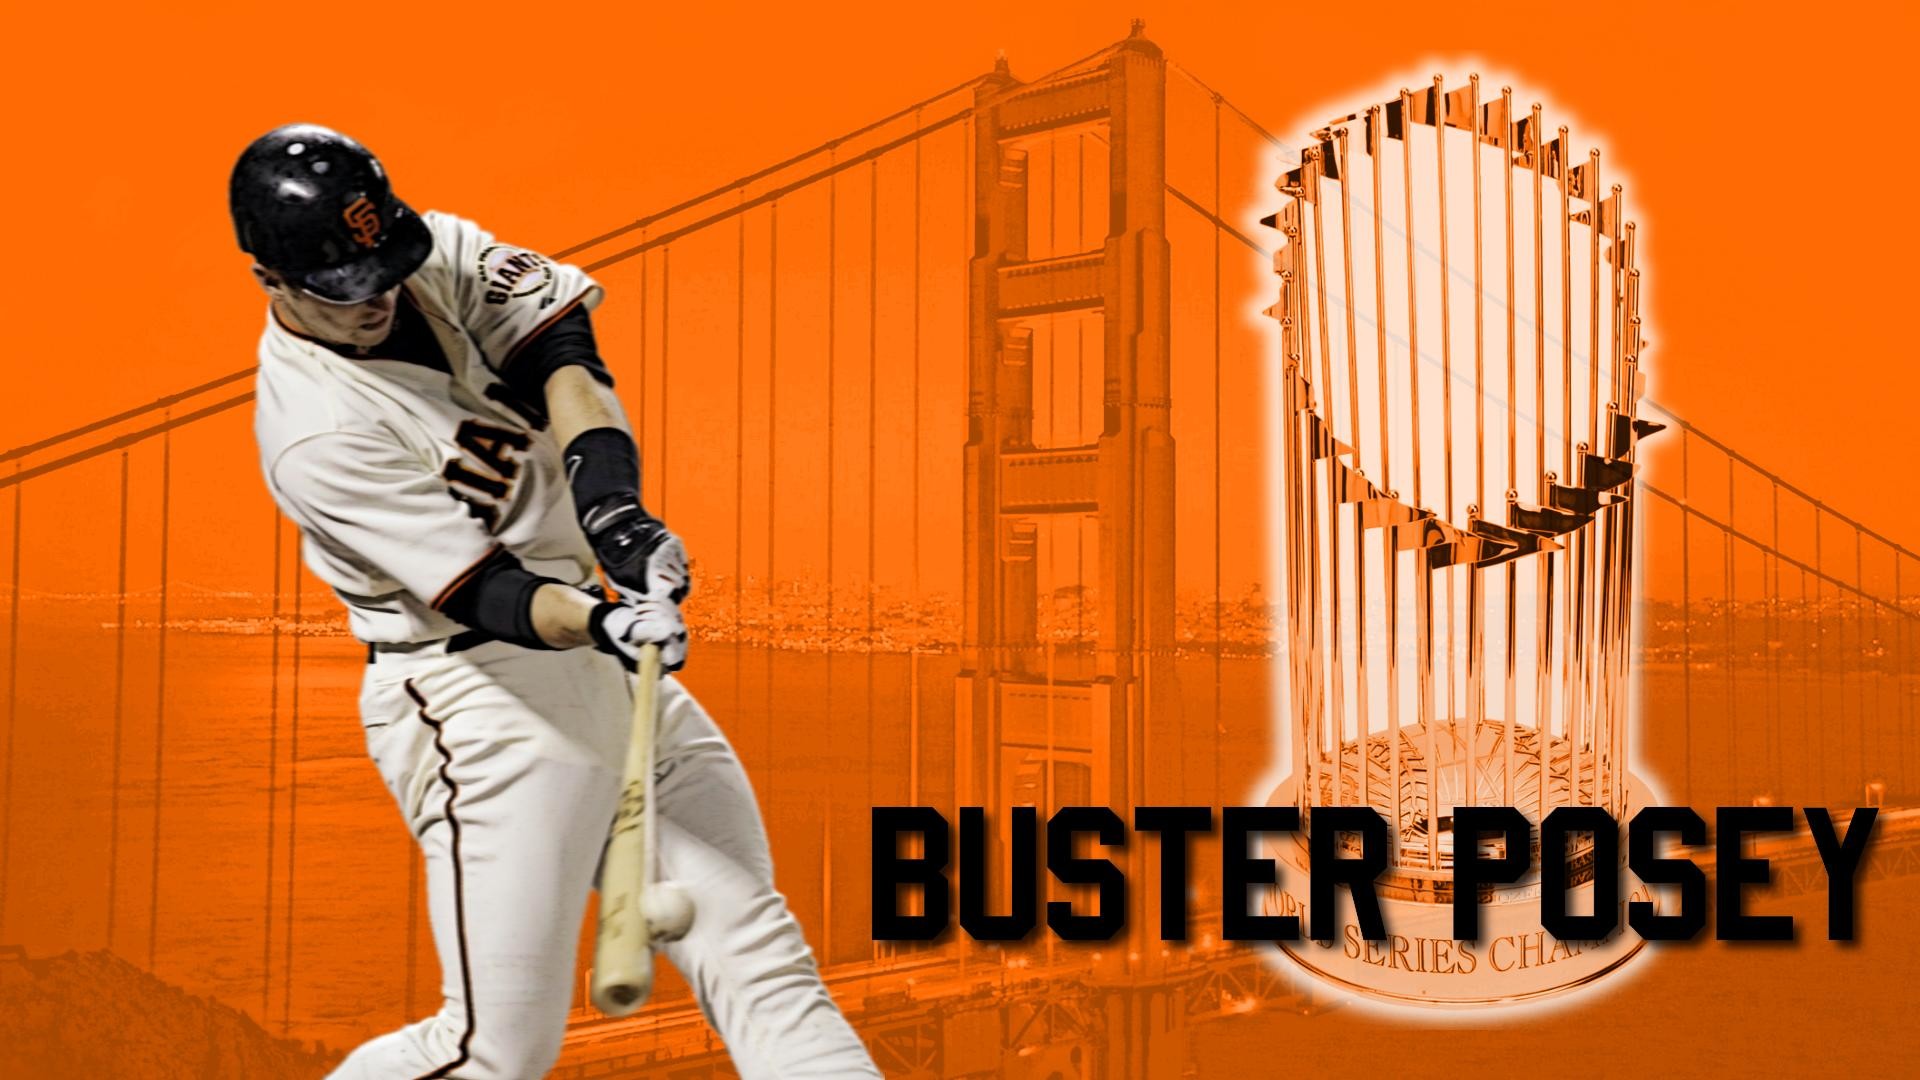 1920x1080 Sf Giants Wallpapers